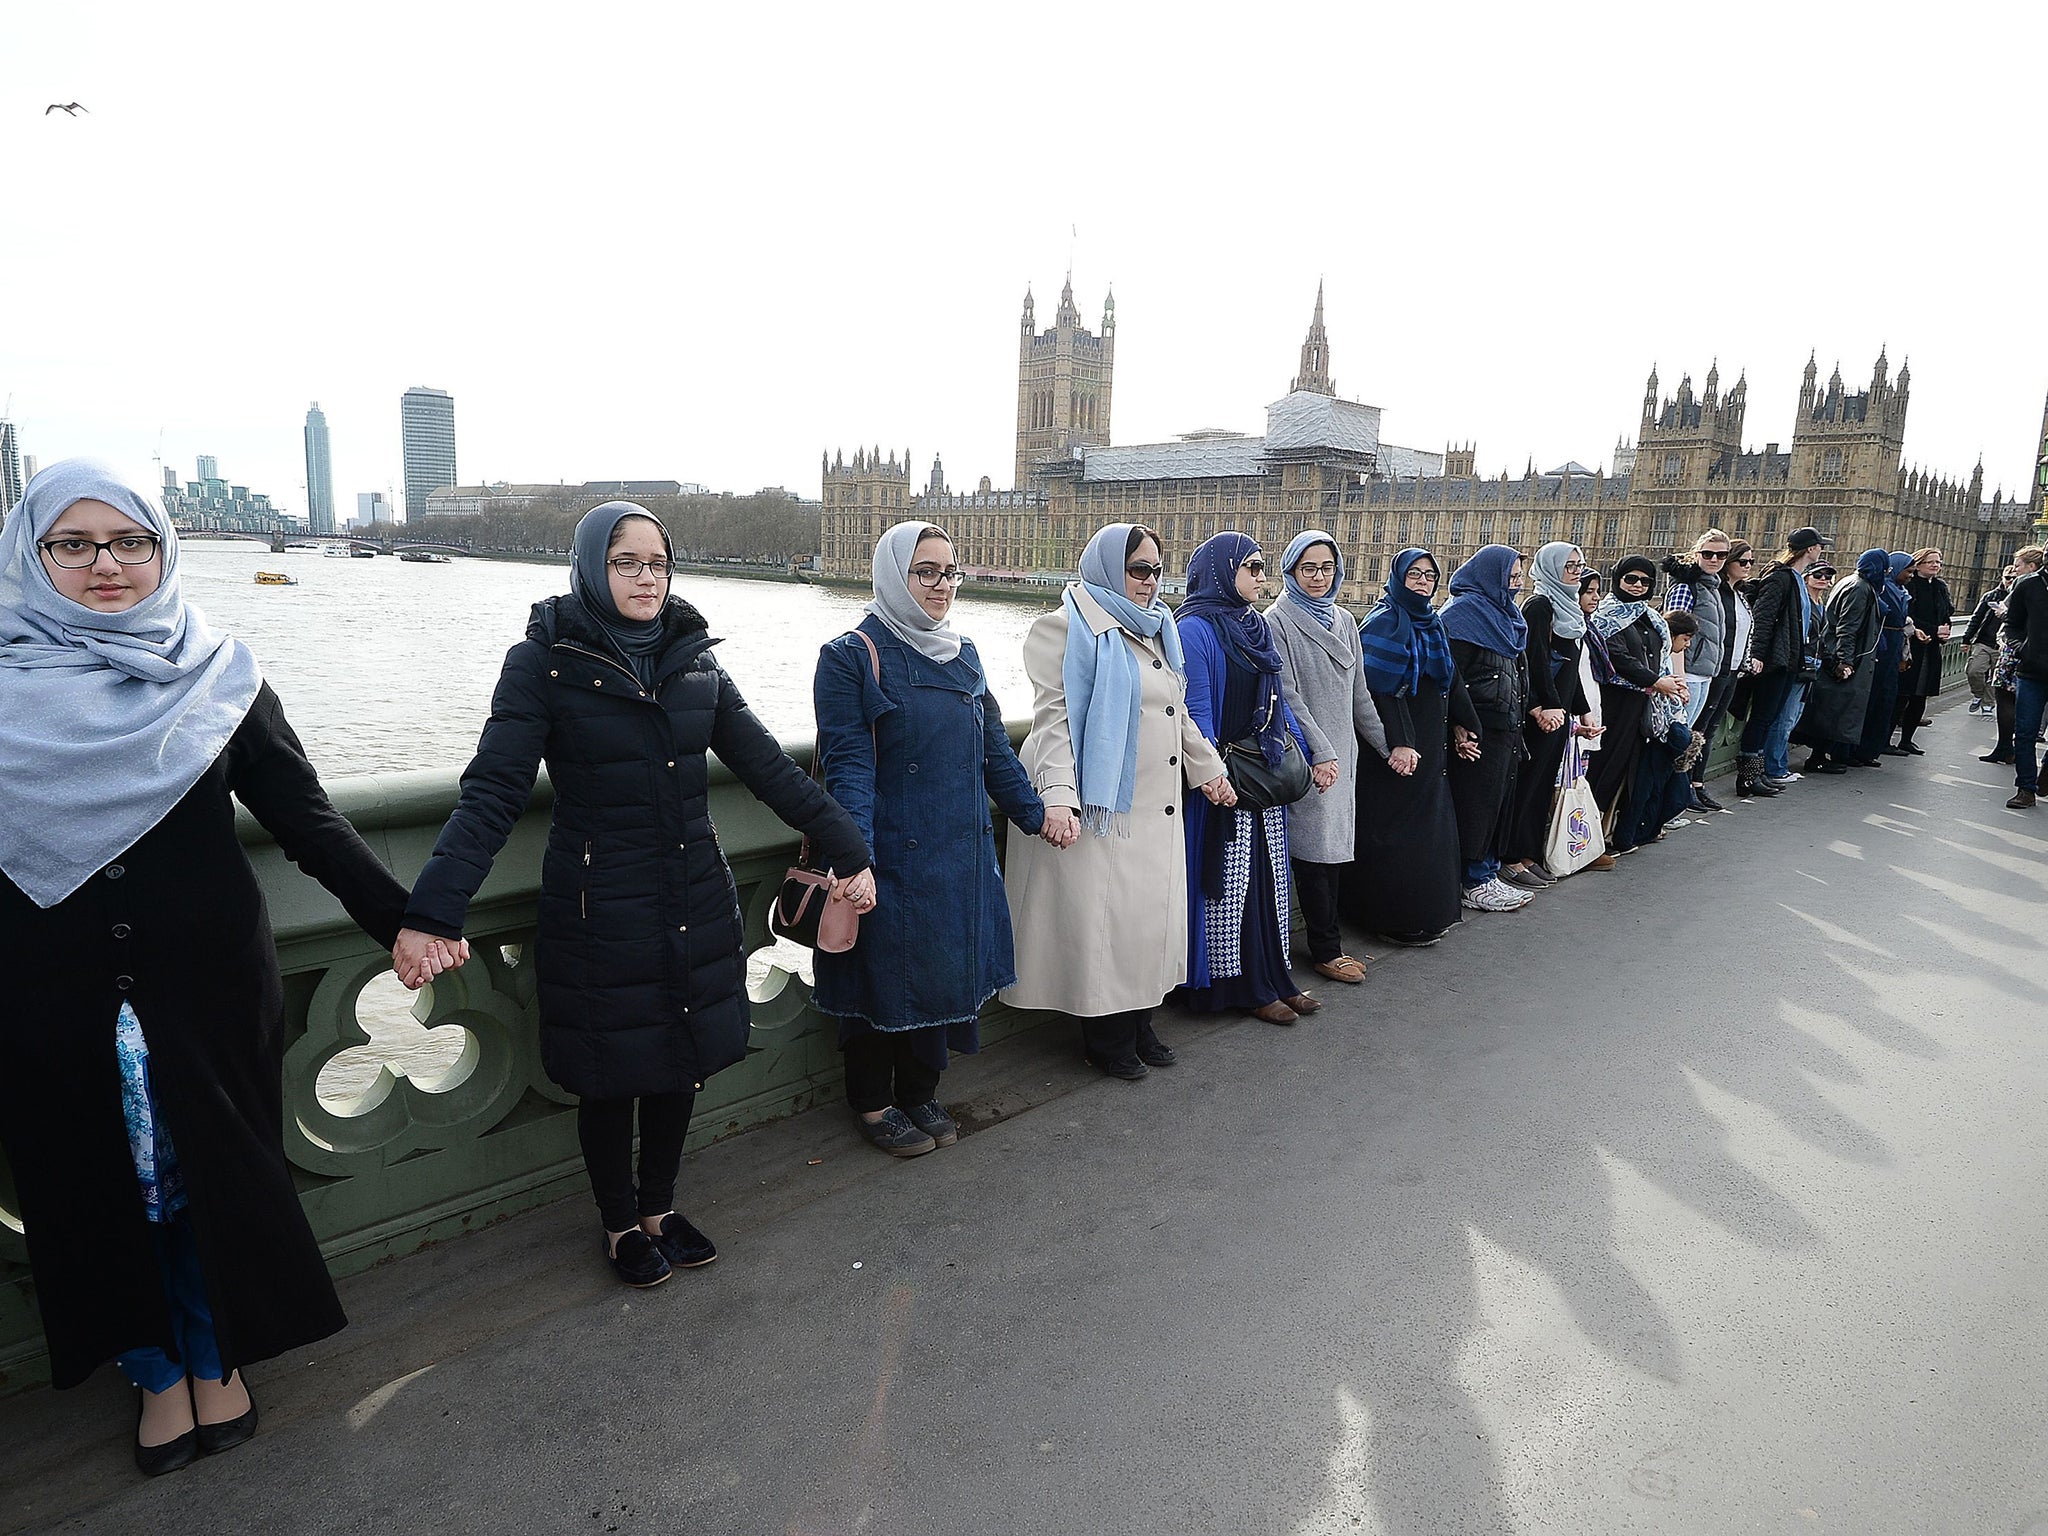 The women, some of whom said they were wearing blue as a symbol of hope, held hands for five minutes